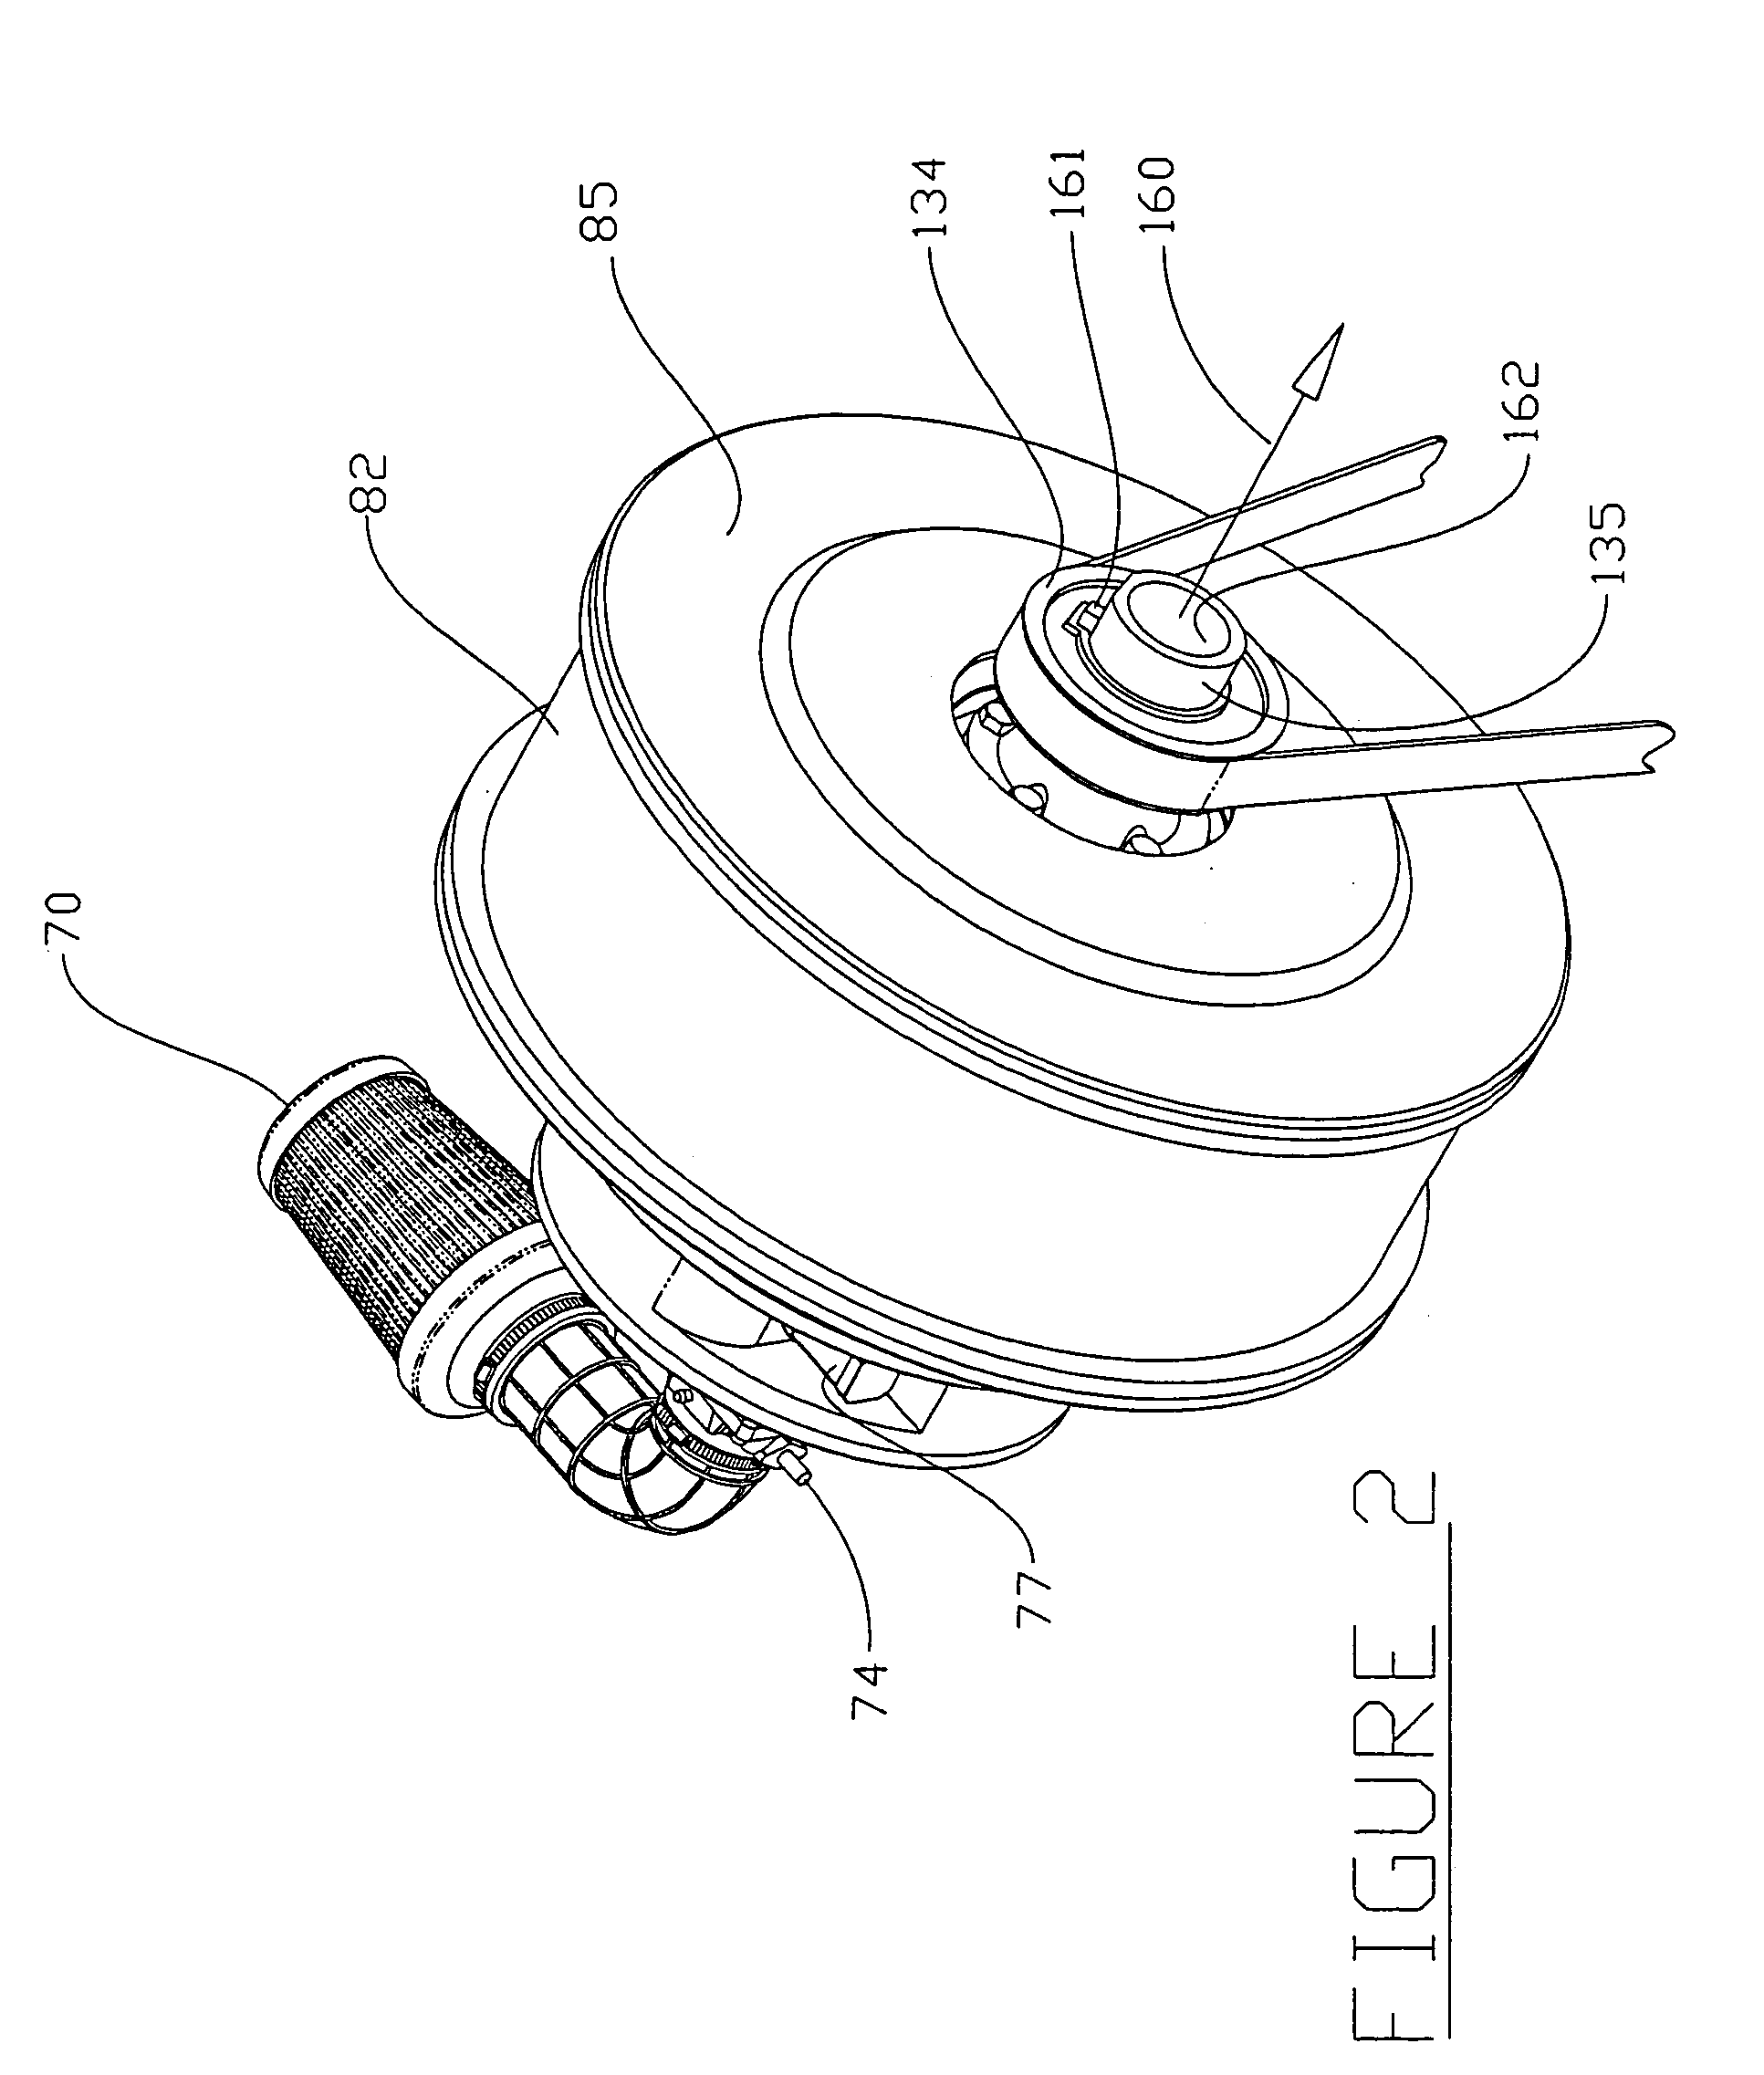 Method of processing waste product into fuel